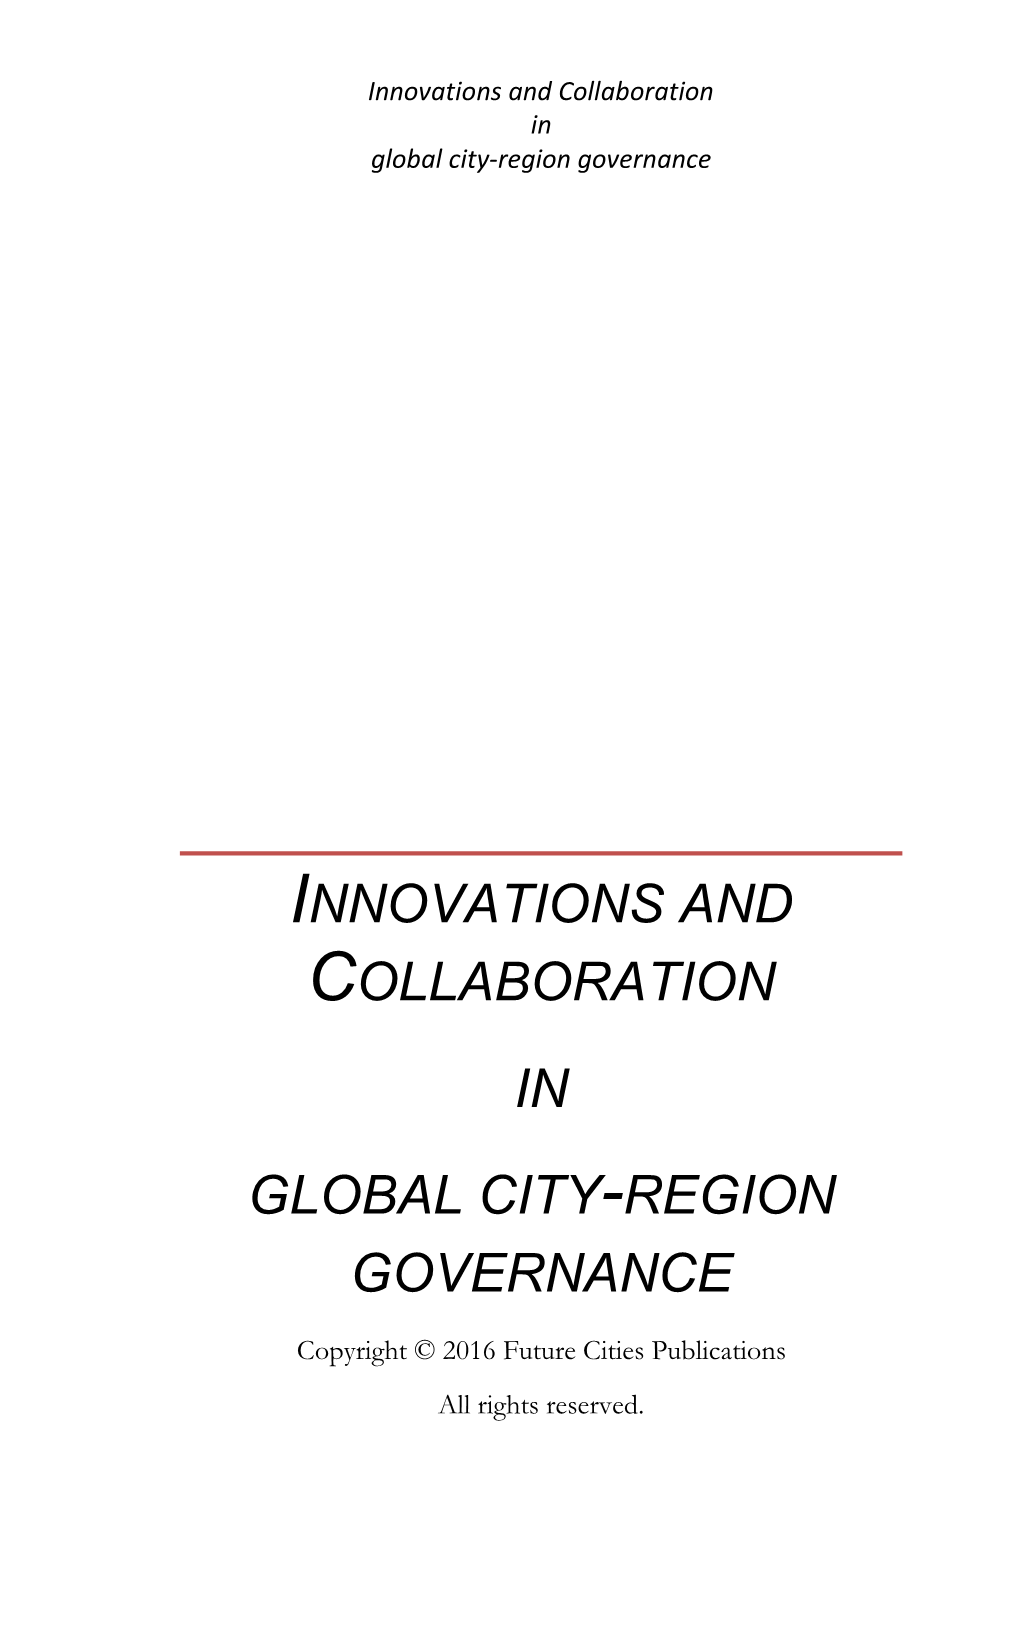 Innovations and Collaboration in Global City-Region Governance